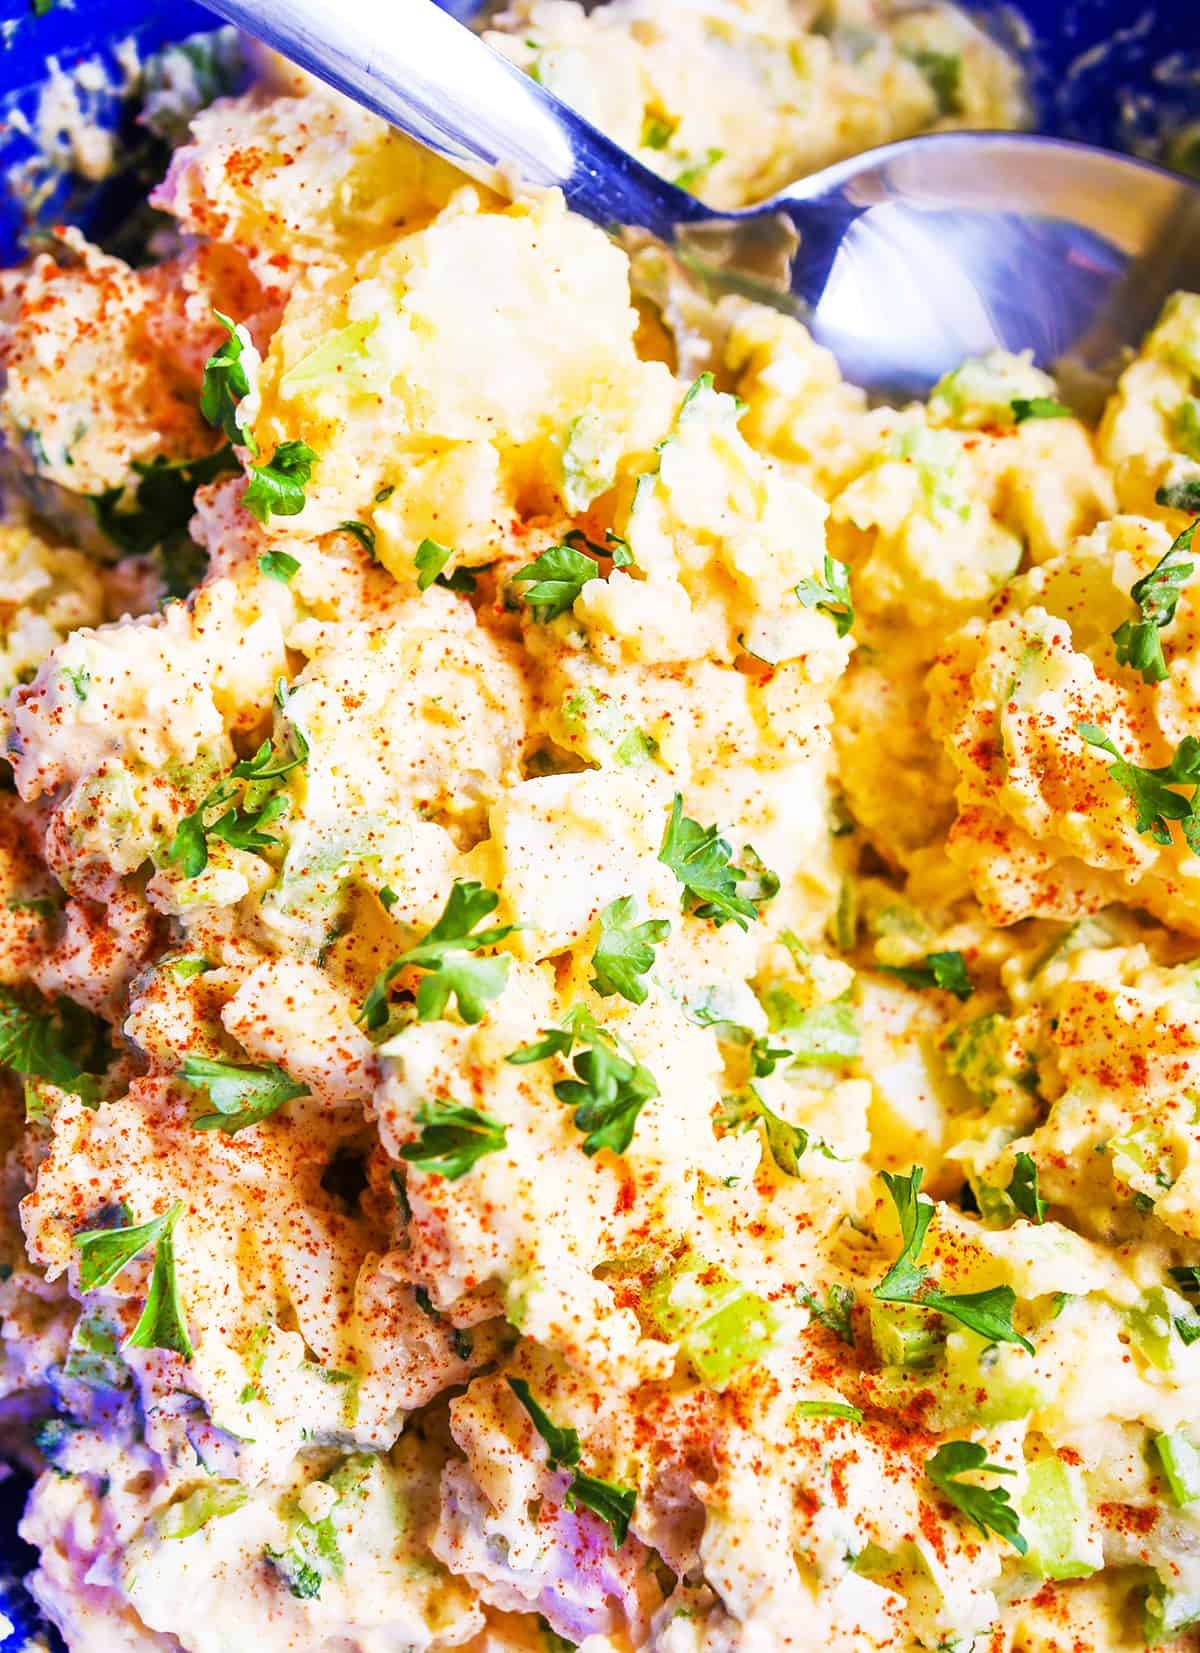 Close up of potato salad with celery bits and parsley.